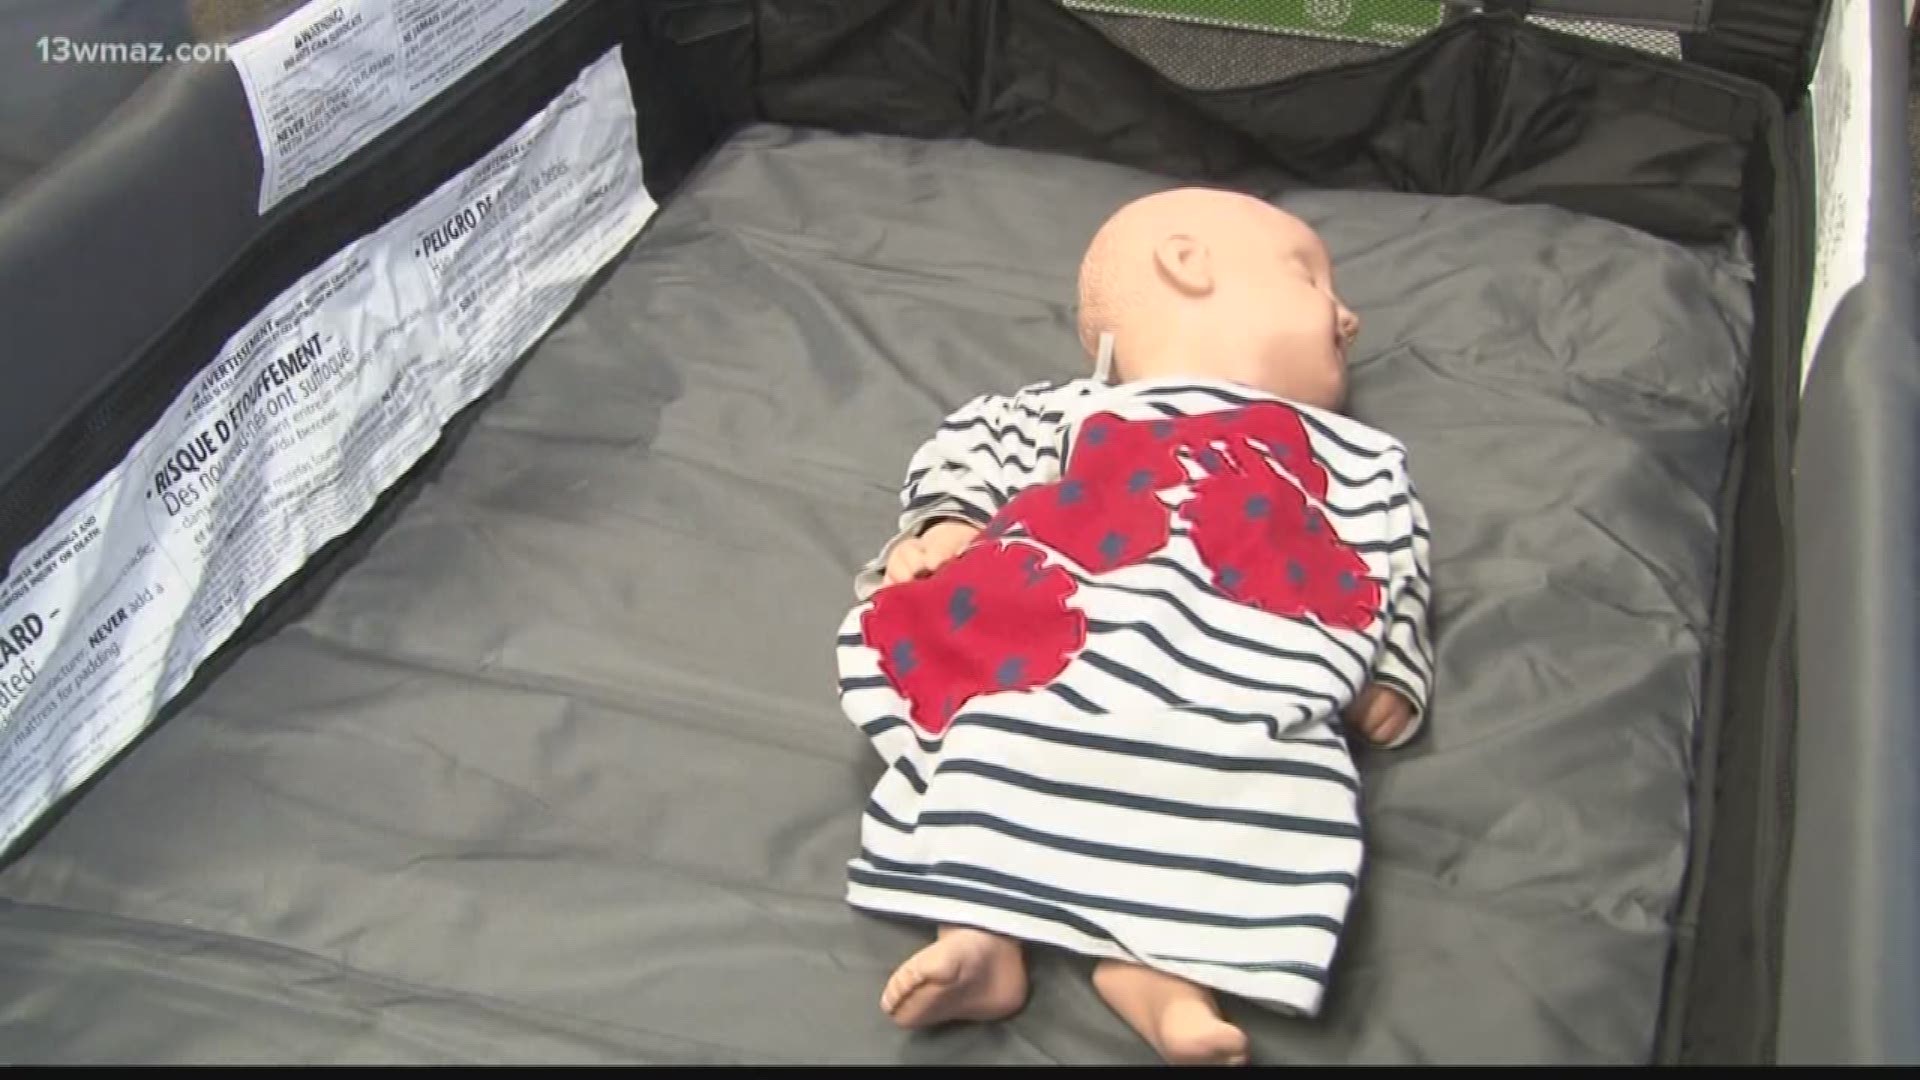 Direct On Scene Education will have EMS personnel teaching parents about safe ways to put their baby to sleep.